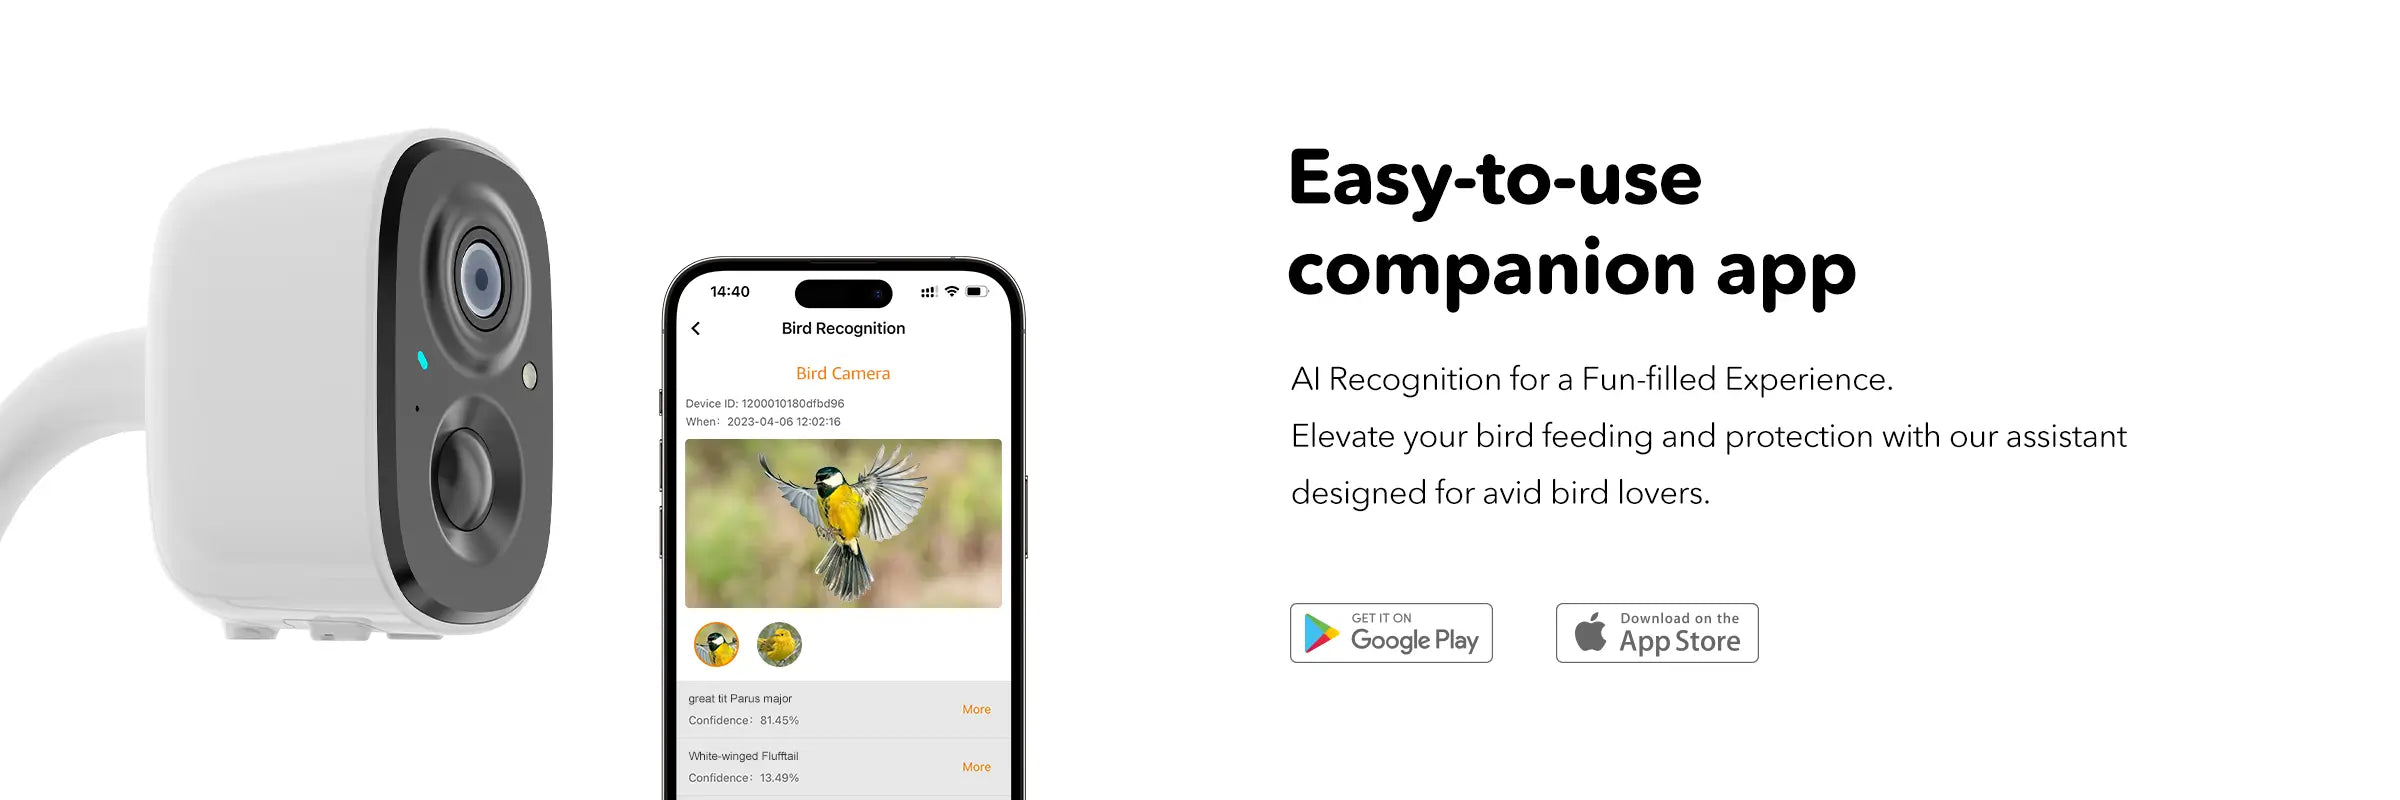 Bilantan APP: Free and powerful AI recognition. Easy-to-usecompanion app